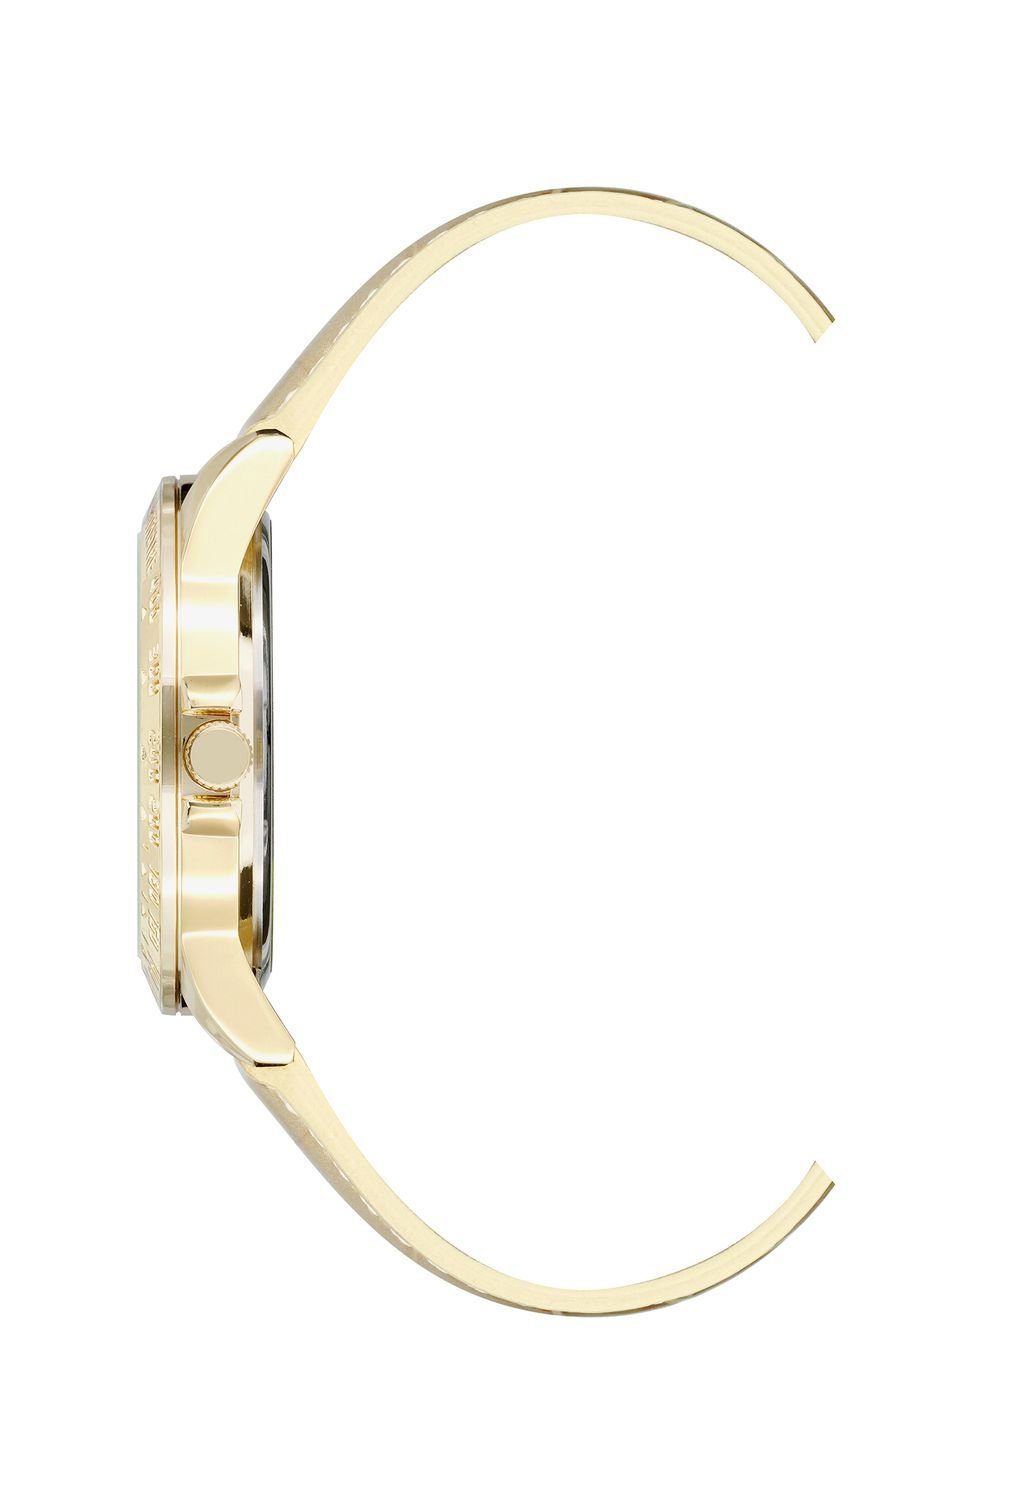 Couture JC/1220GPGD Digitaluhr Juicy